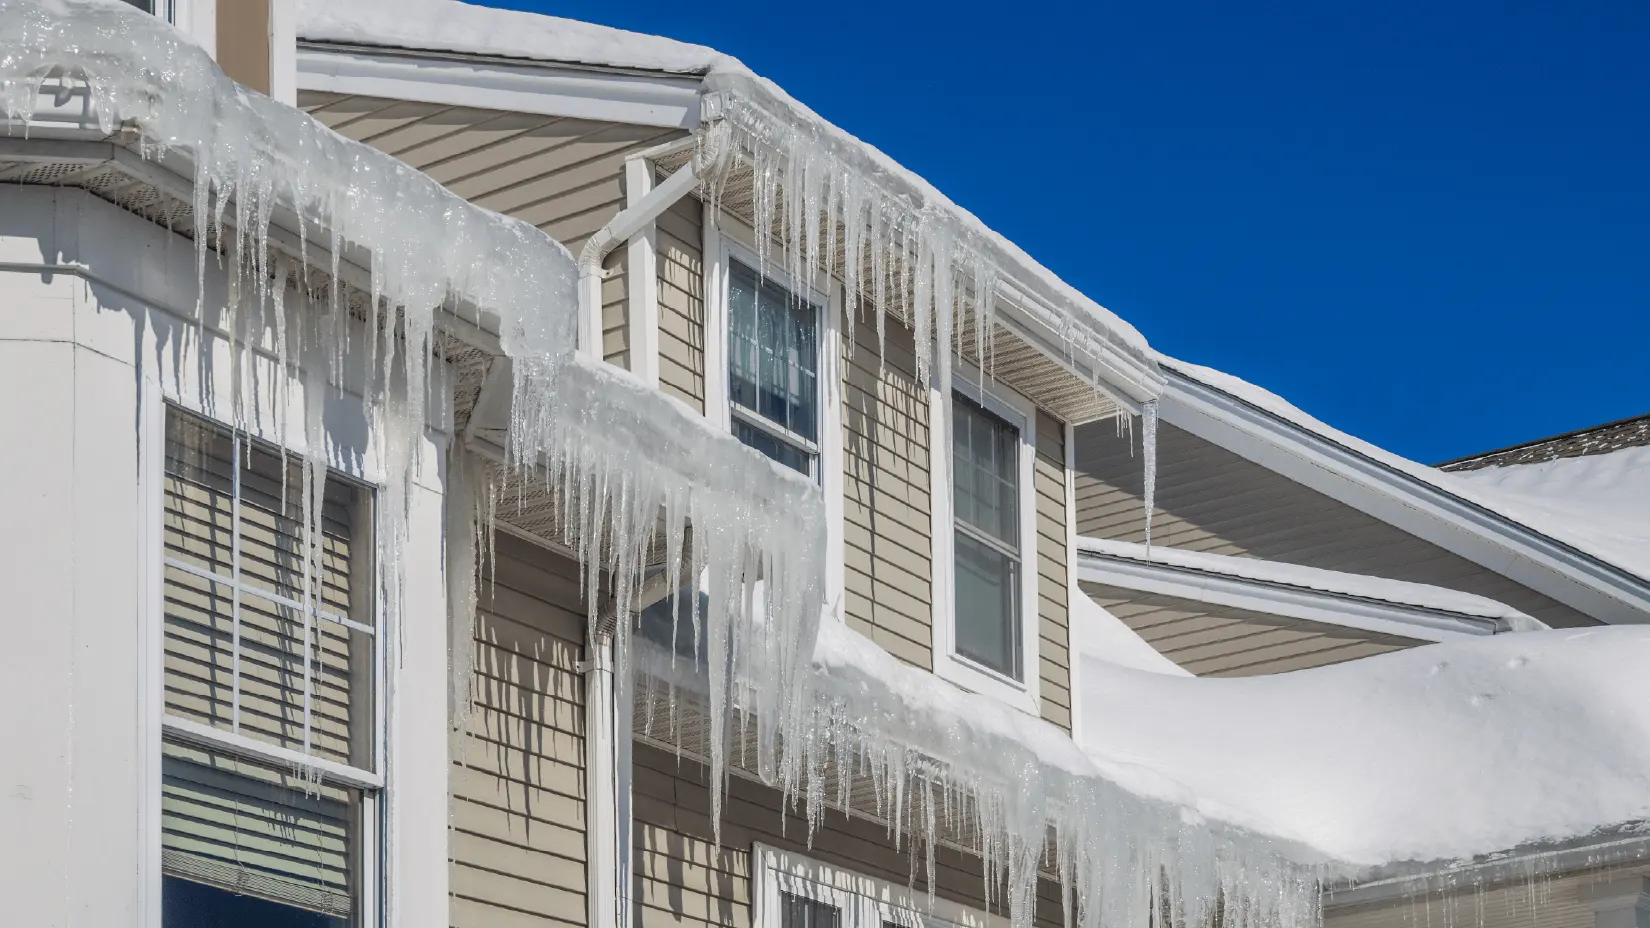 House with ice dam and long icicles hanging from roof. 